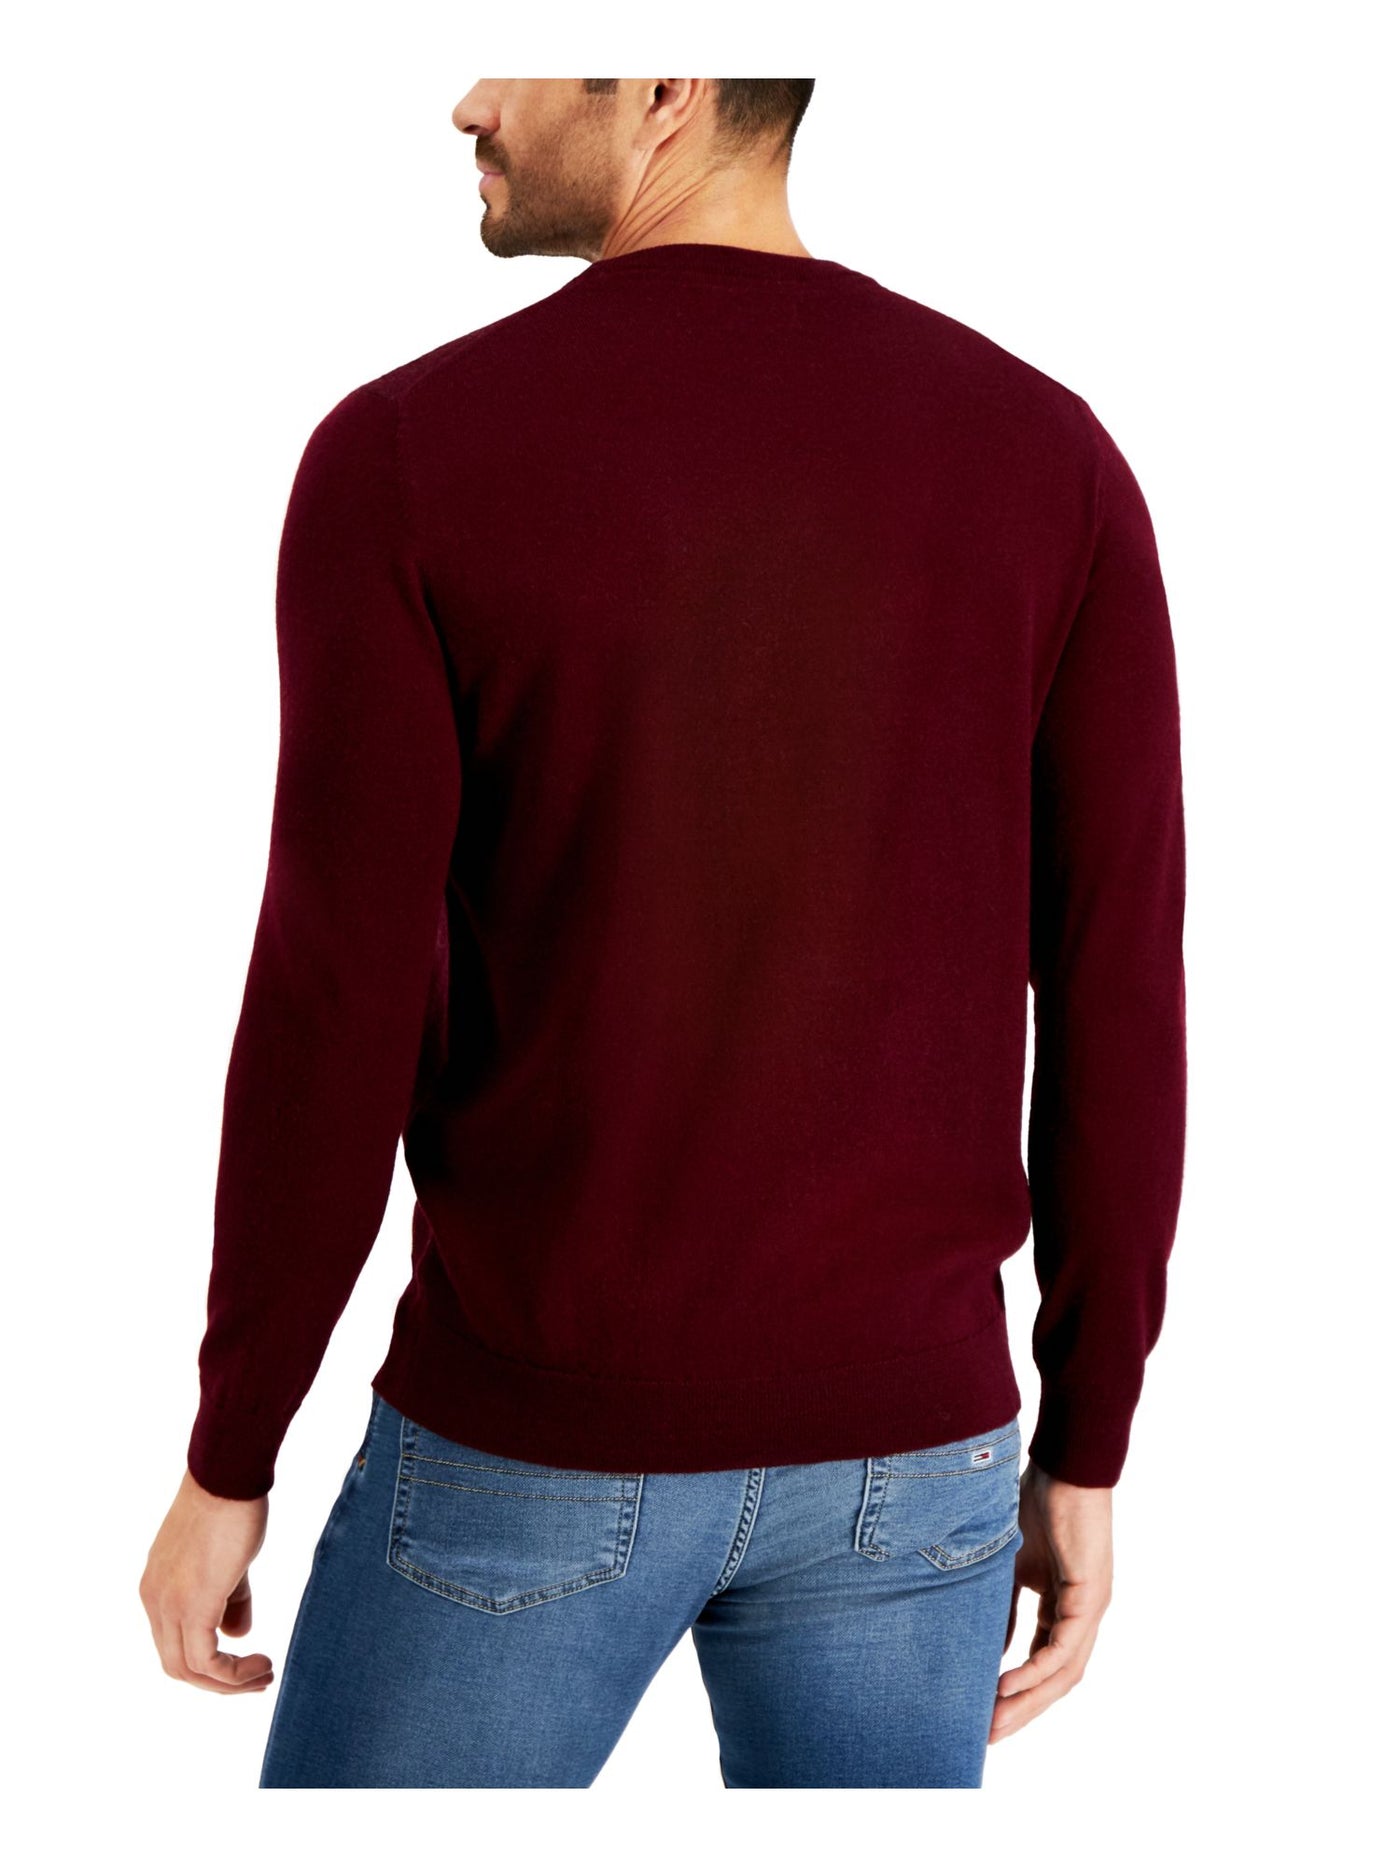 CLUBROOM Mens Maroon Graphic Long Sleeve Crew Neck Classic Fit Pullover Sweater XXL